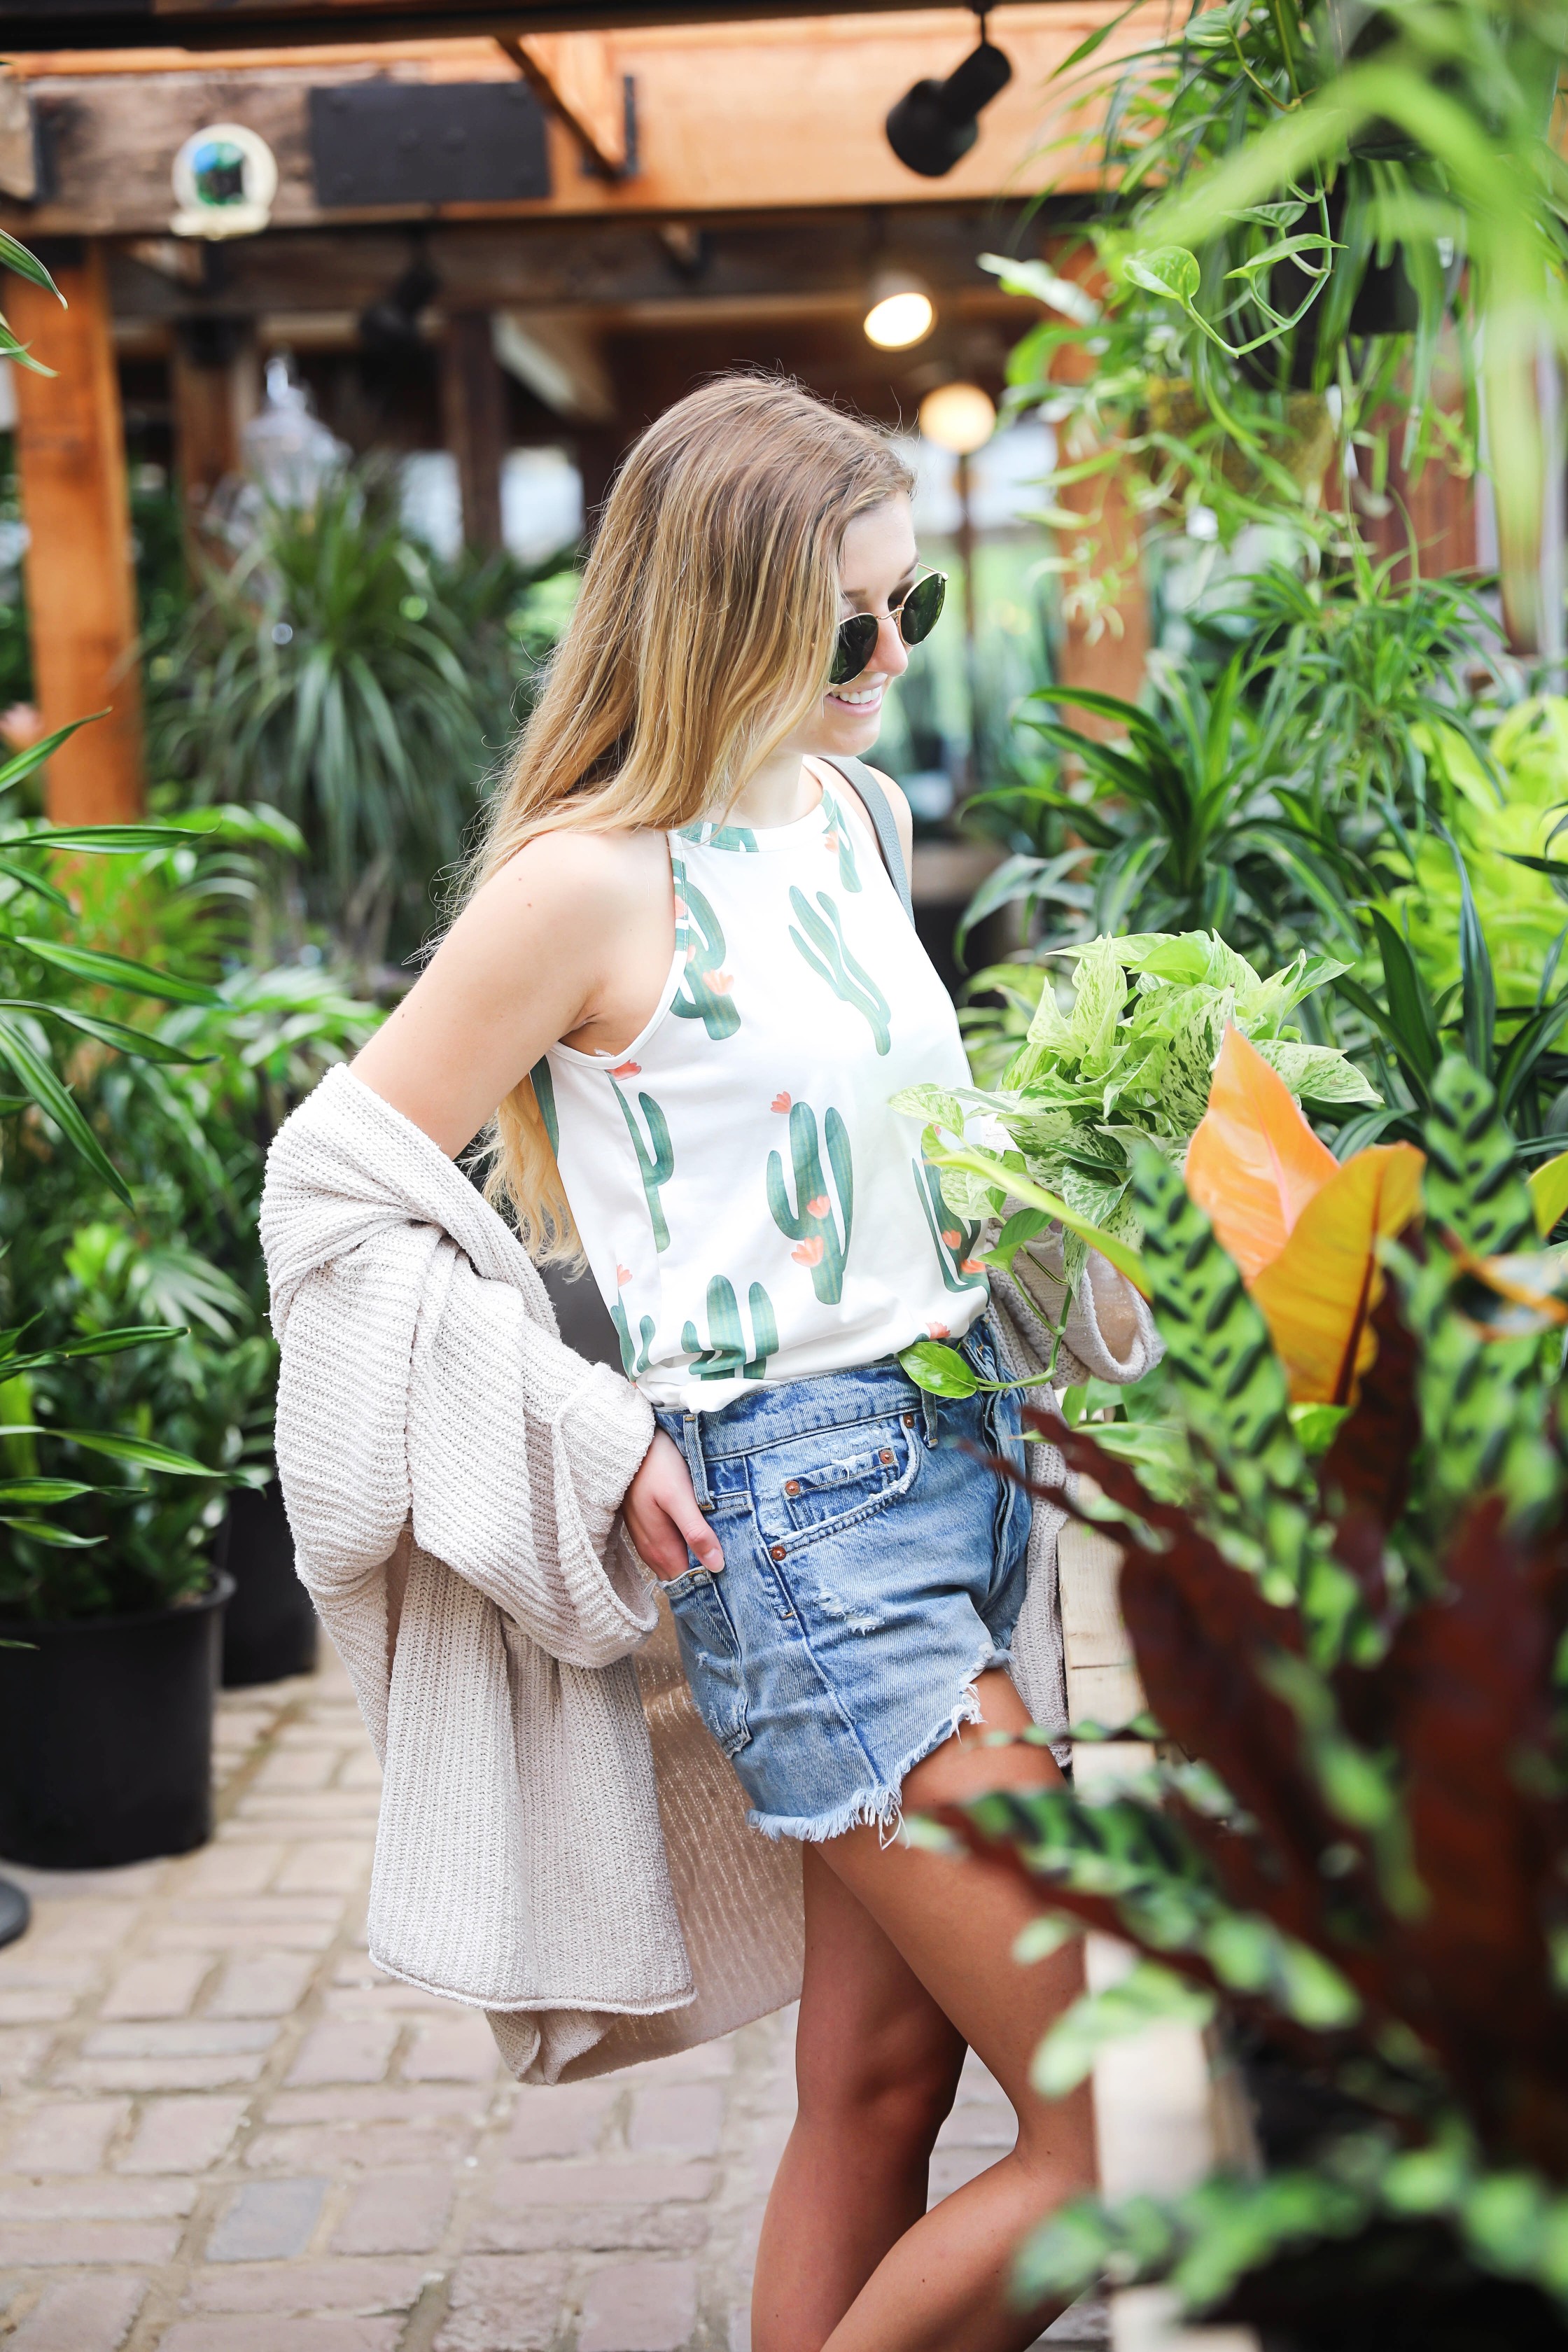 Cutest cactus top! Not only is it adorable, but it's inexpensive! I paired them with jean shorts, my favorite cream free people cardigan, my new allsaints bag, Tory Burch Millers, and Ray Ban sunglasses! The cutest summer outfit shot at a flower and plant nursery! Details on fashion blog daily dose of charm by lauren lindmark